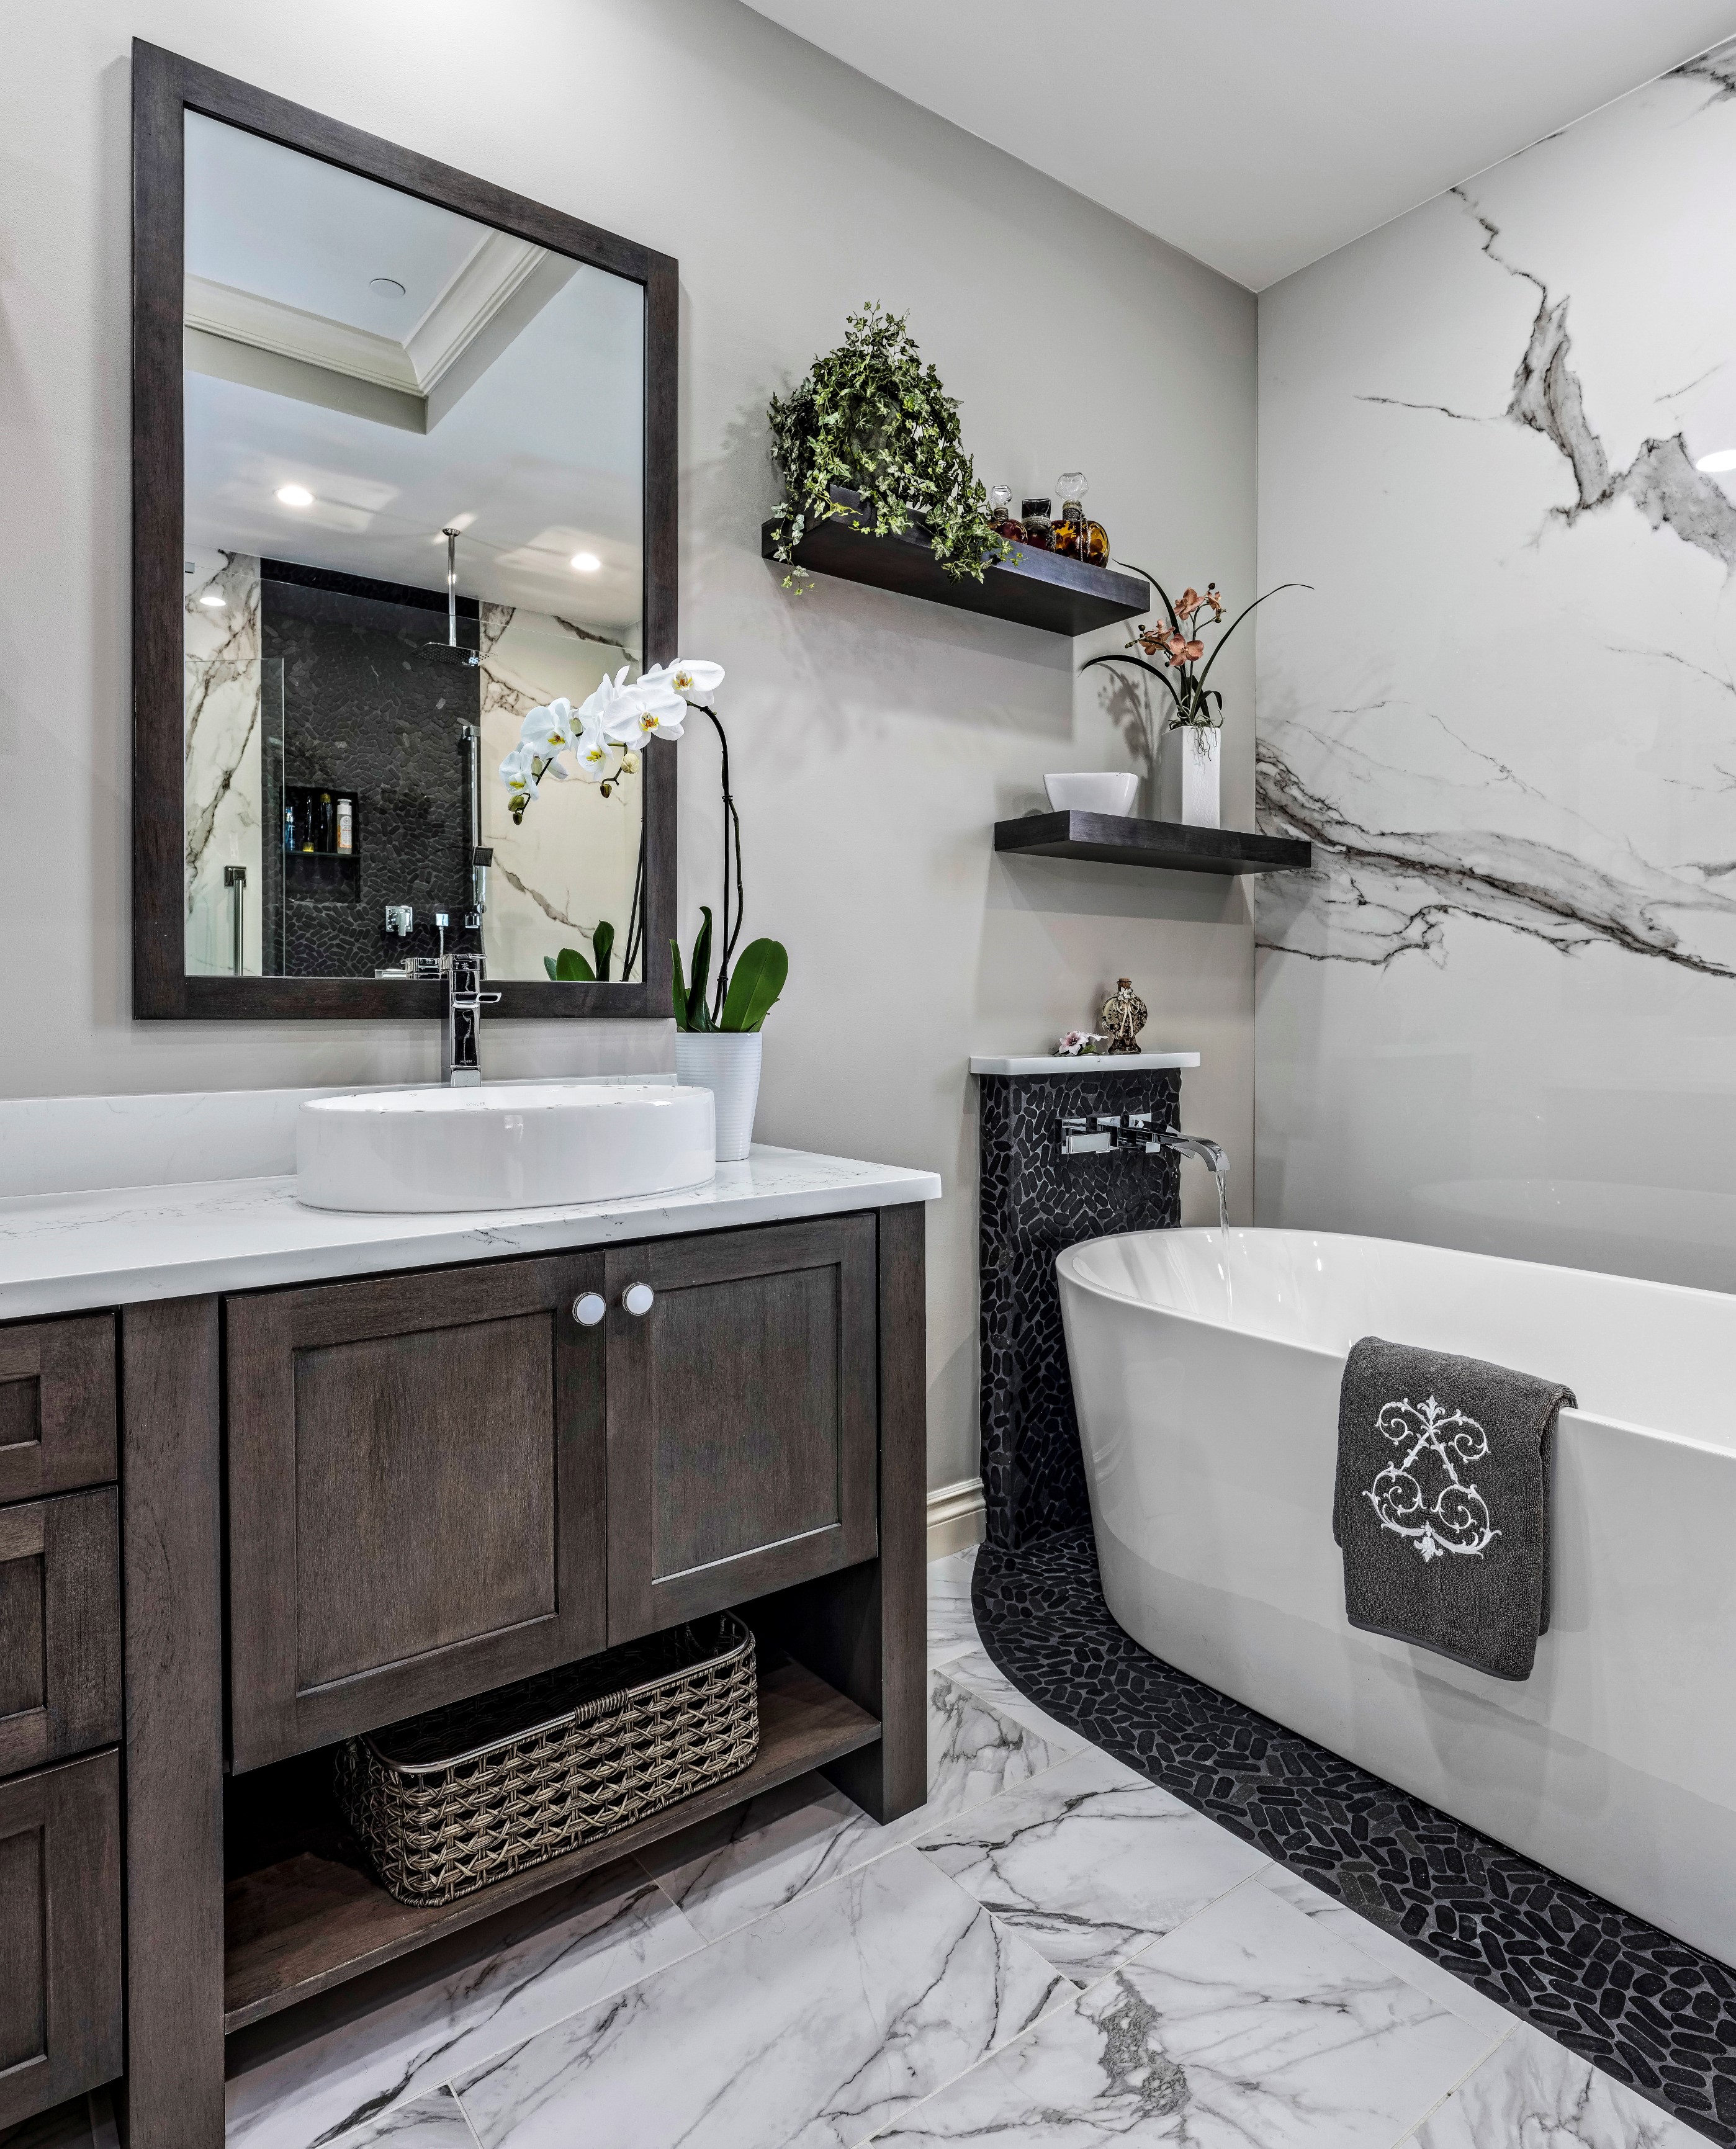 Bathroom Remodeling Typically Cost, How Much Does It Cost To Remodel 2 Bathrooms